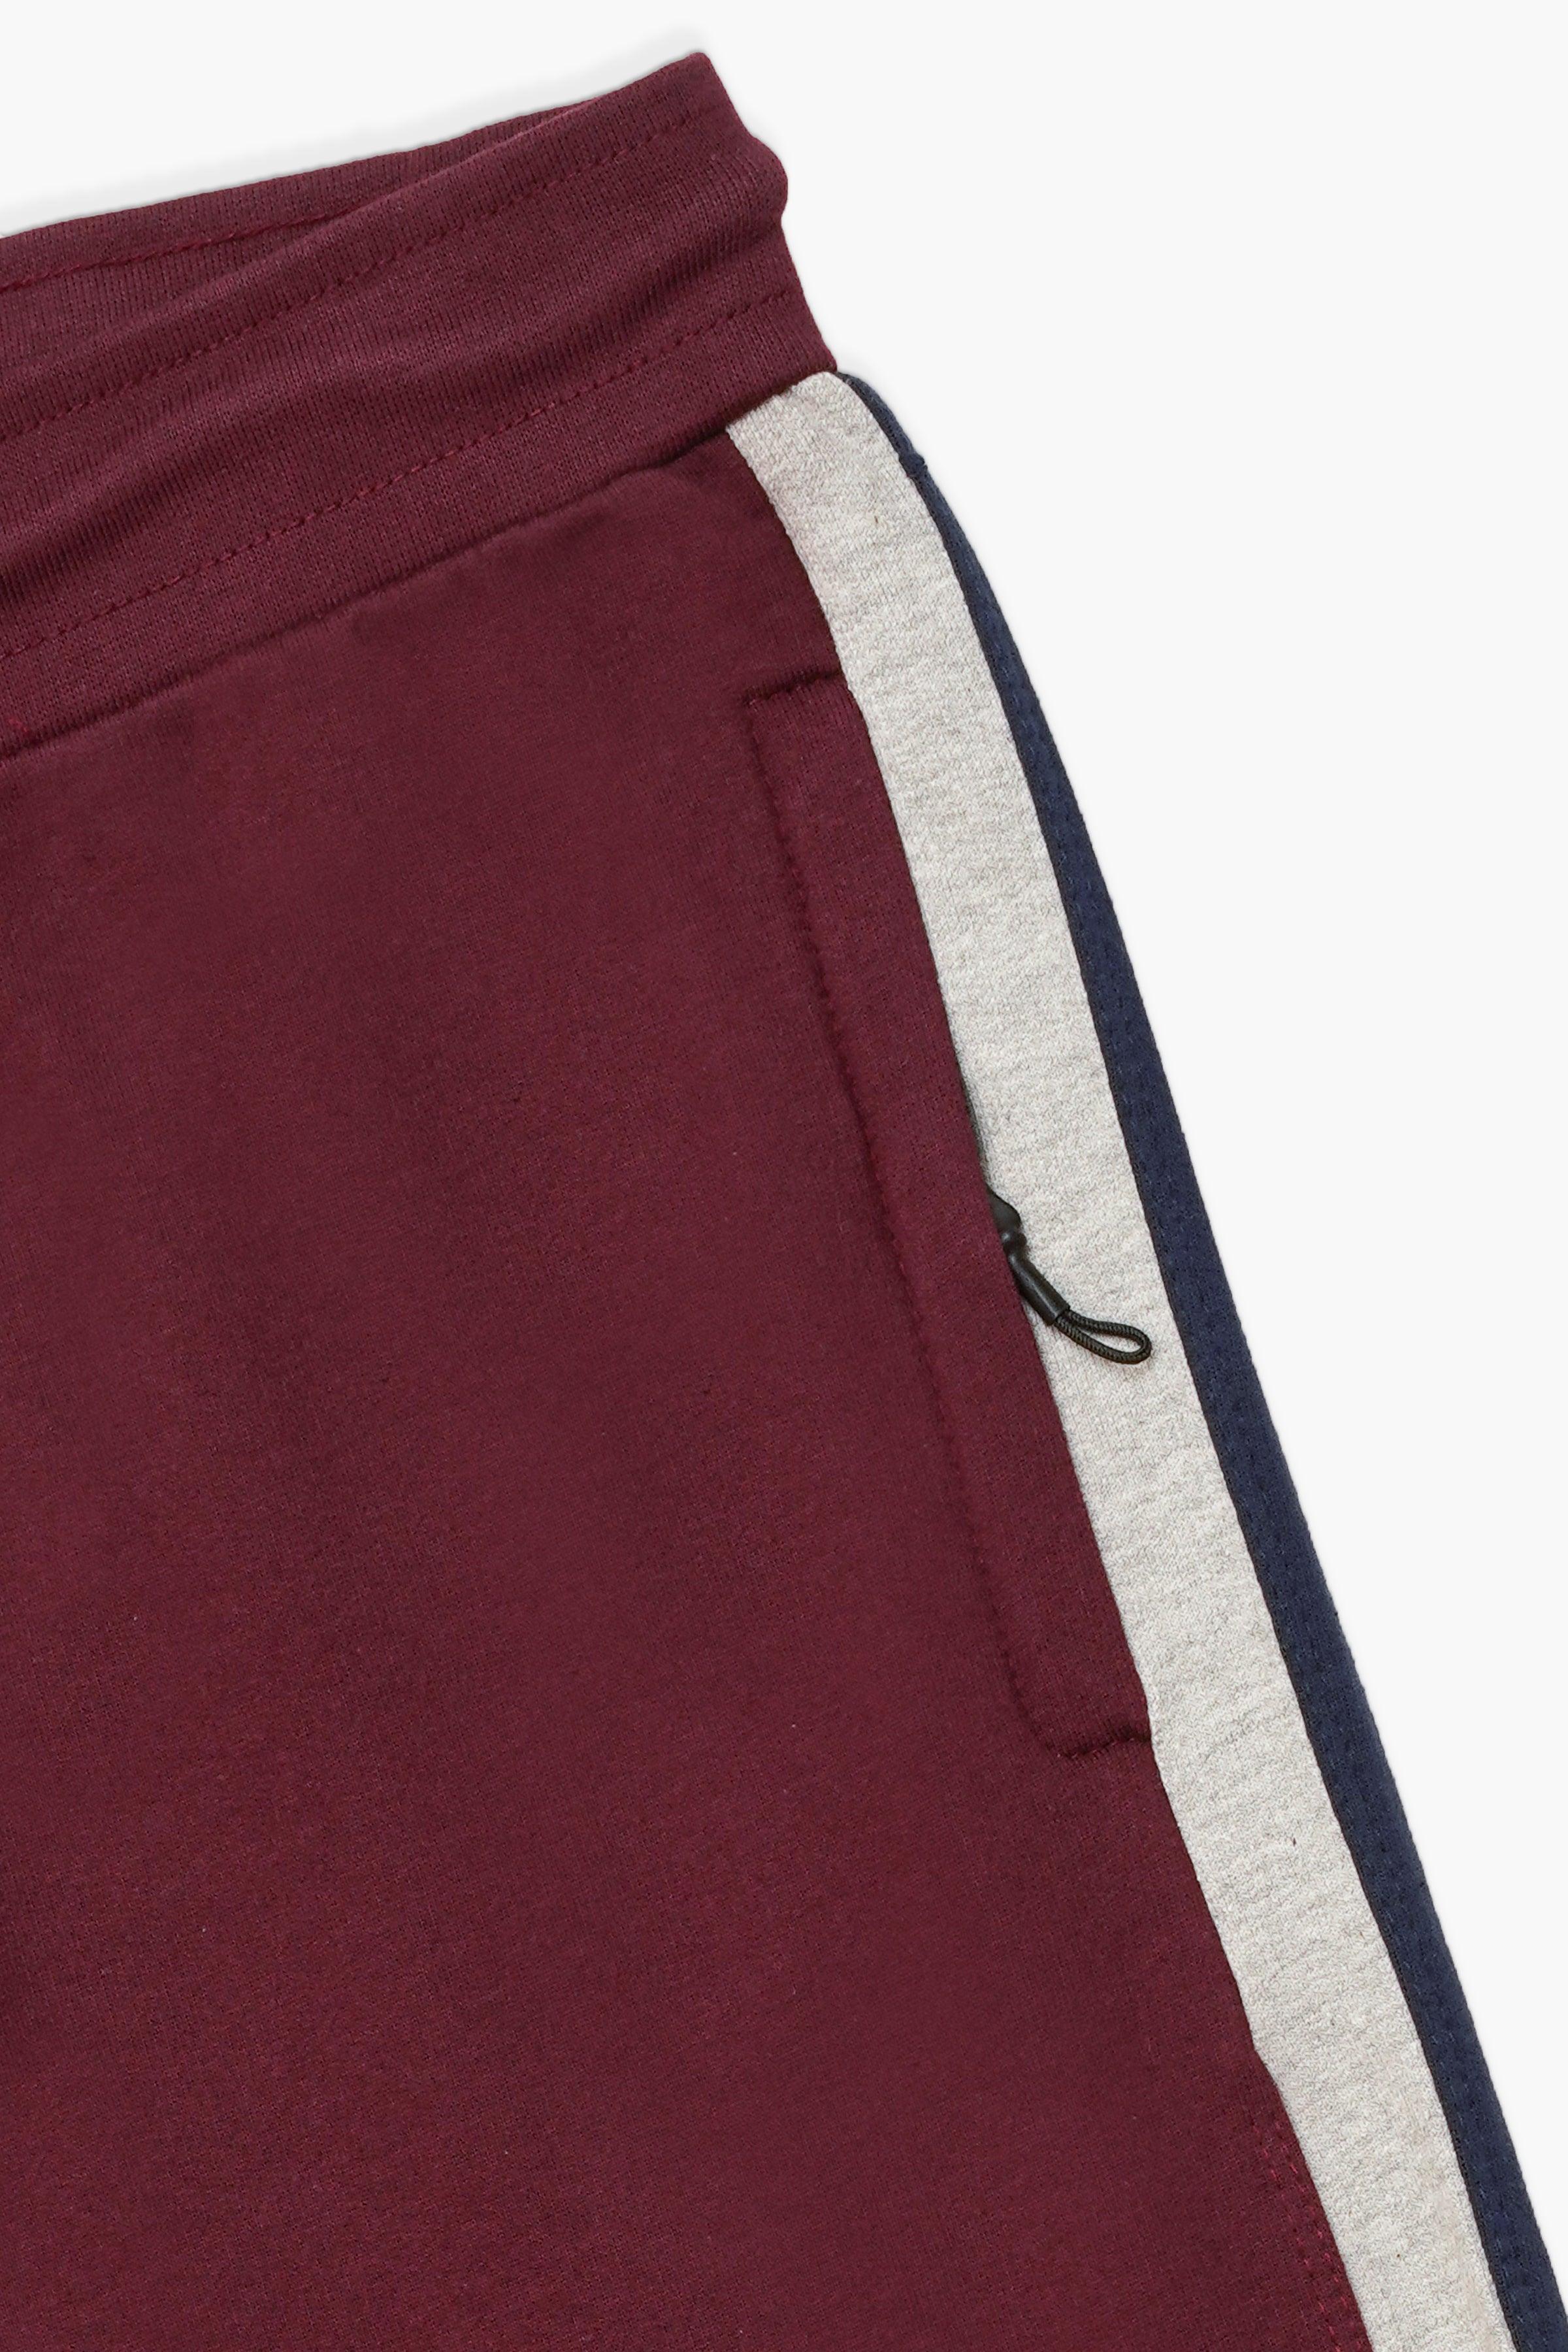 TERRY CONTRAST JOGGING TROUSER MAROON at Charcoal Clothing